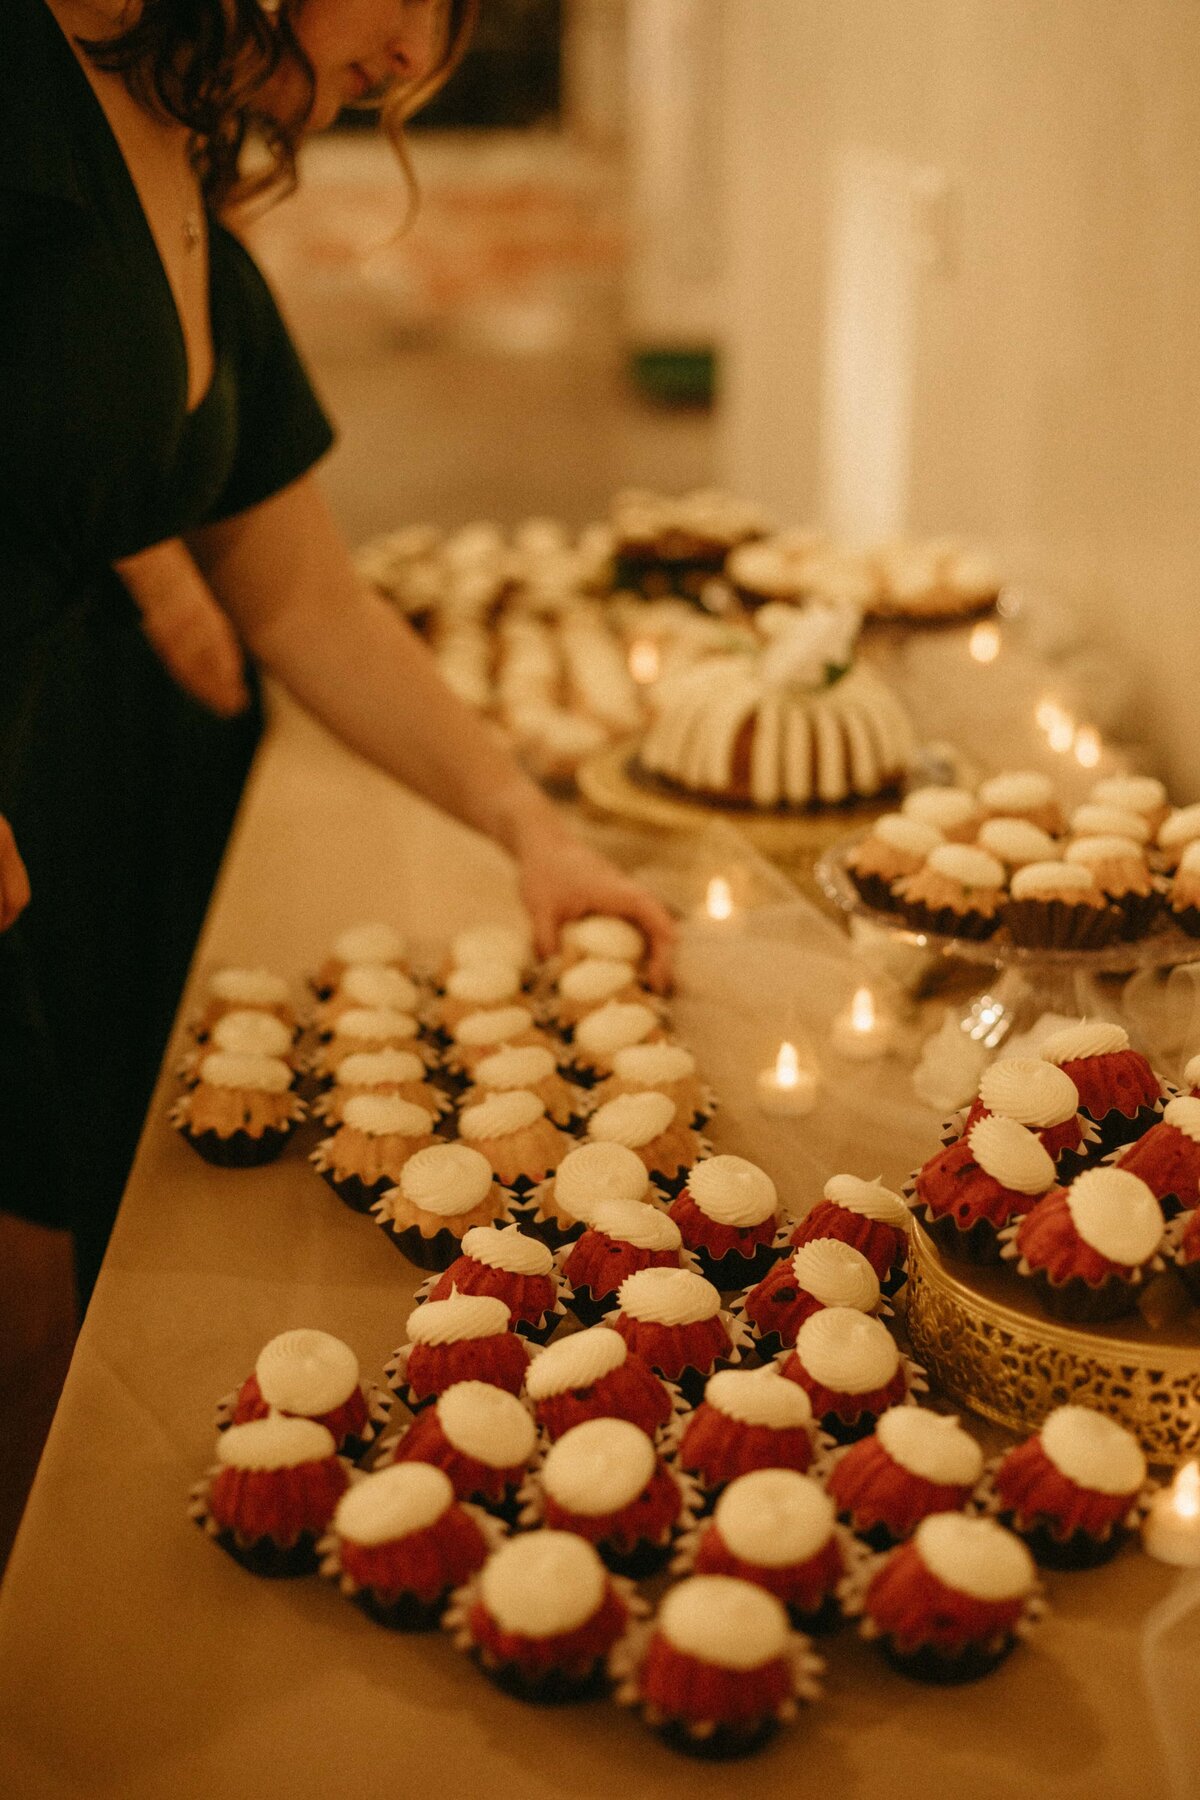 A wedding planner in a green dress arranges an assortment of cupcakes on a table lit by candles at an event.